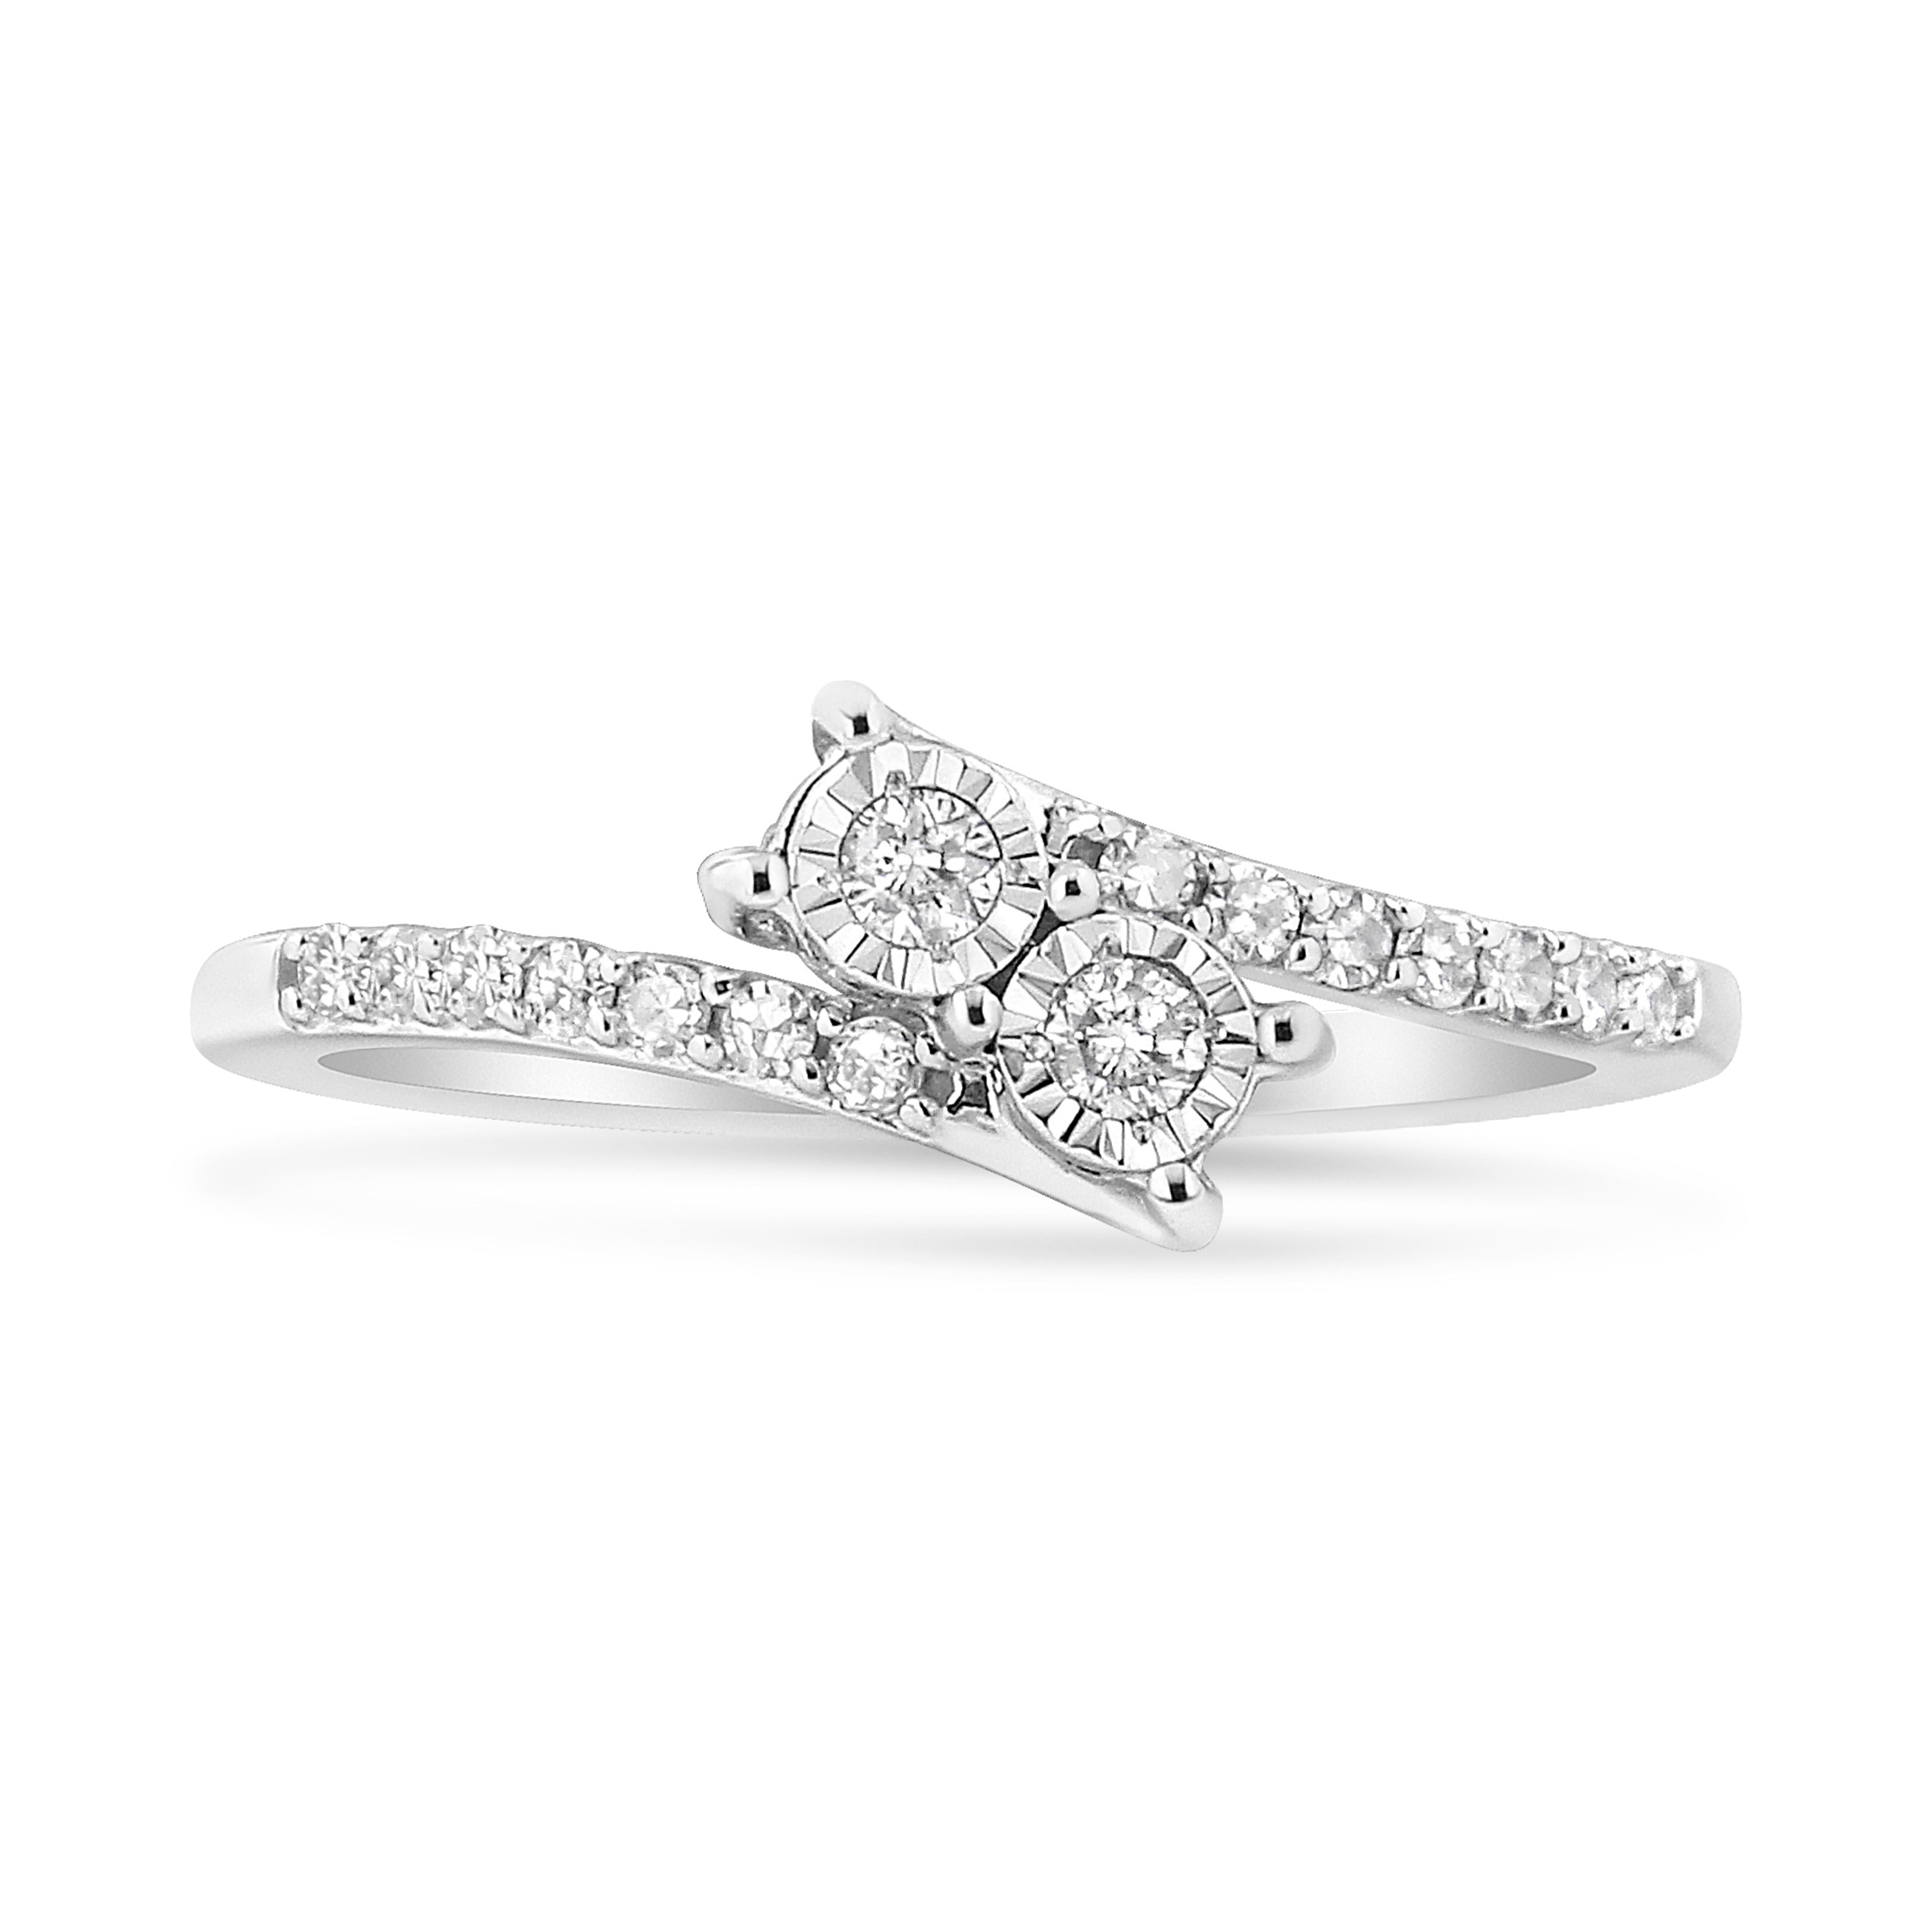 Make a remarkable addition to your diamond collection with this soul-striking diamond ring. Two round diamonds nestle inside curves of 10K white gold in this lovely two-stone ring for her. Fashioned in 10kt white gold, this diamond ring features a